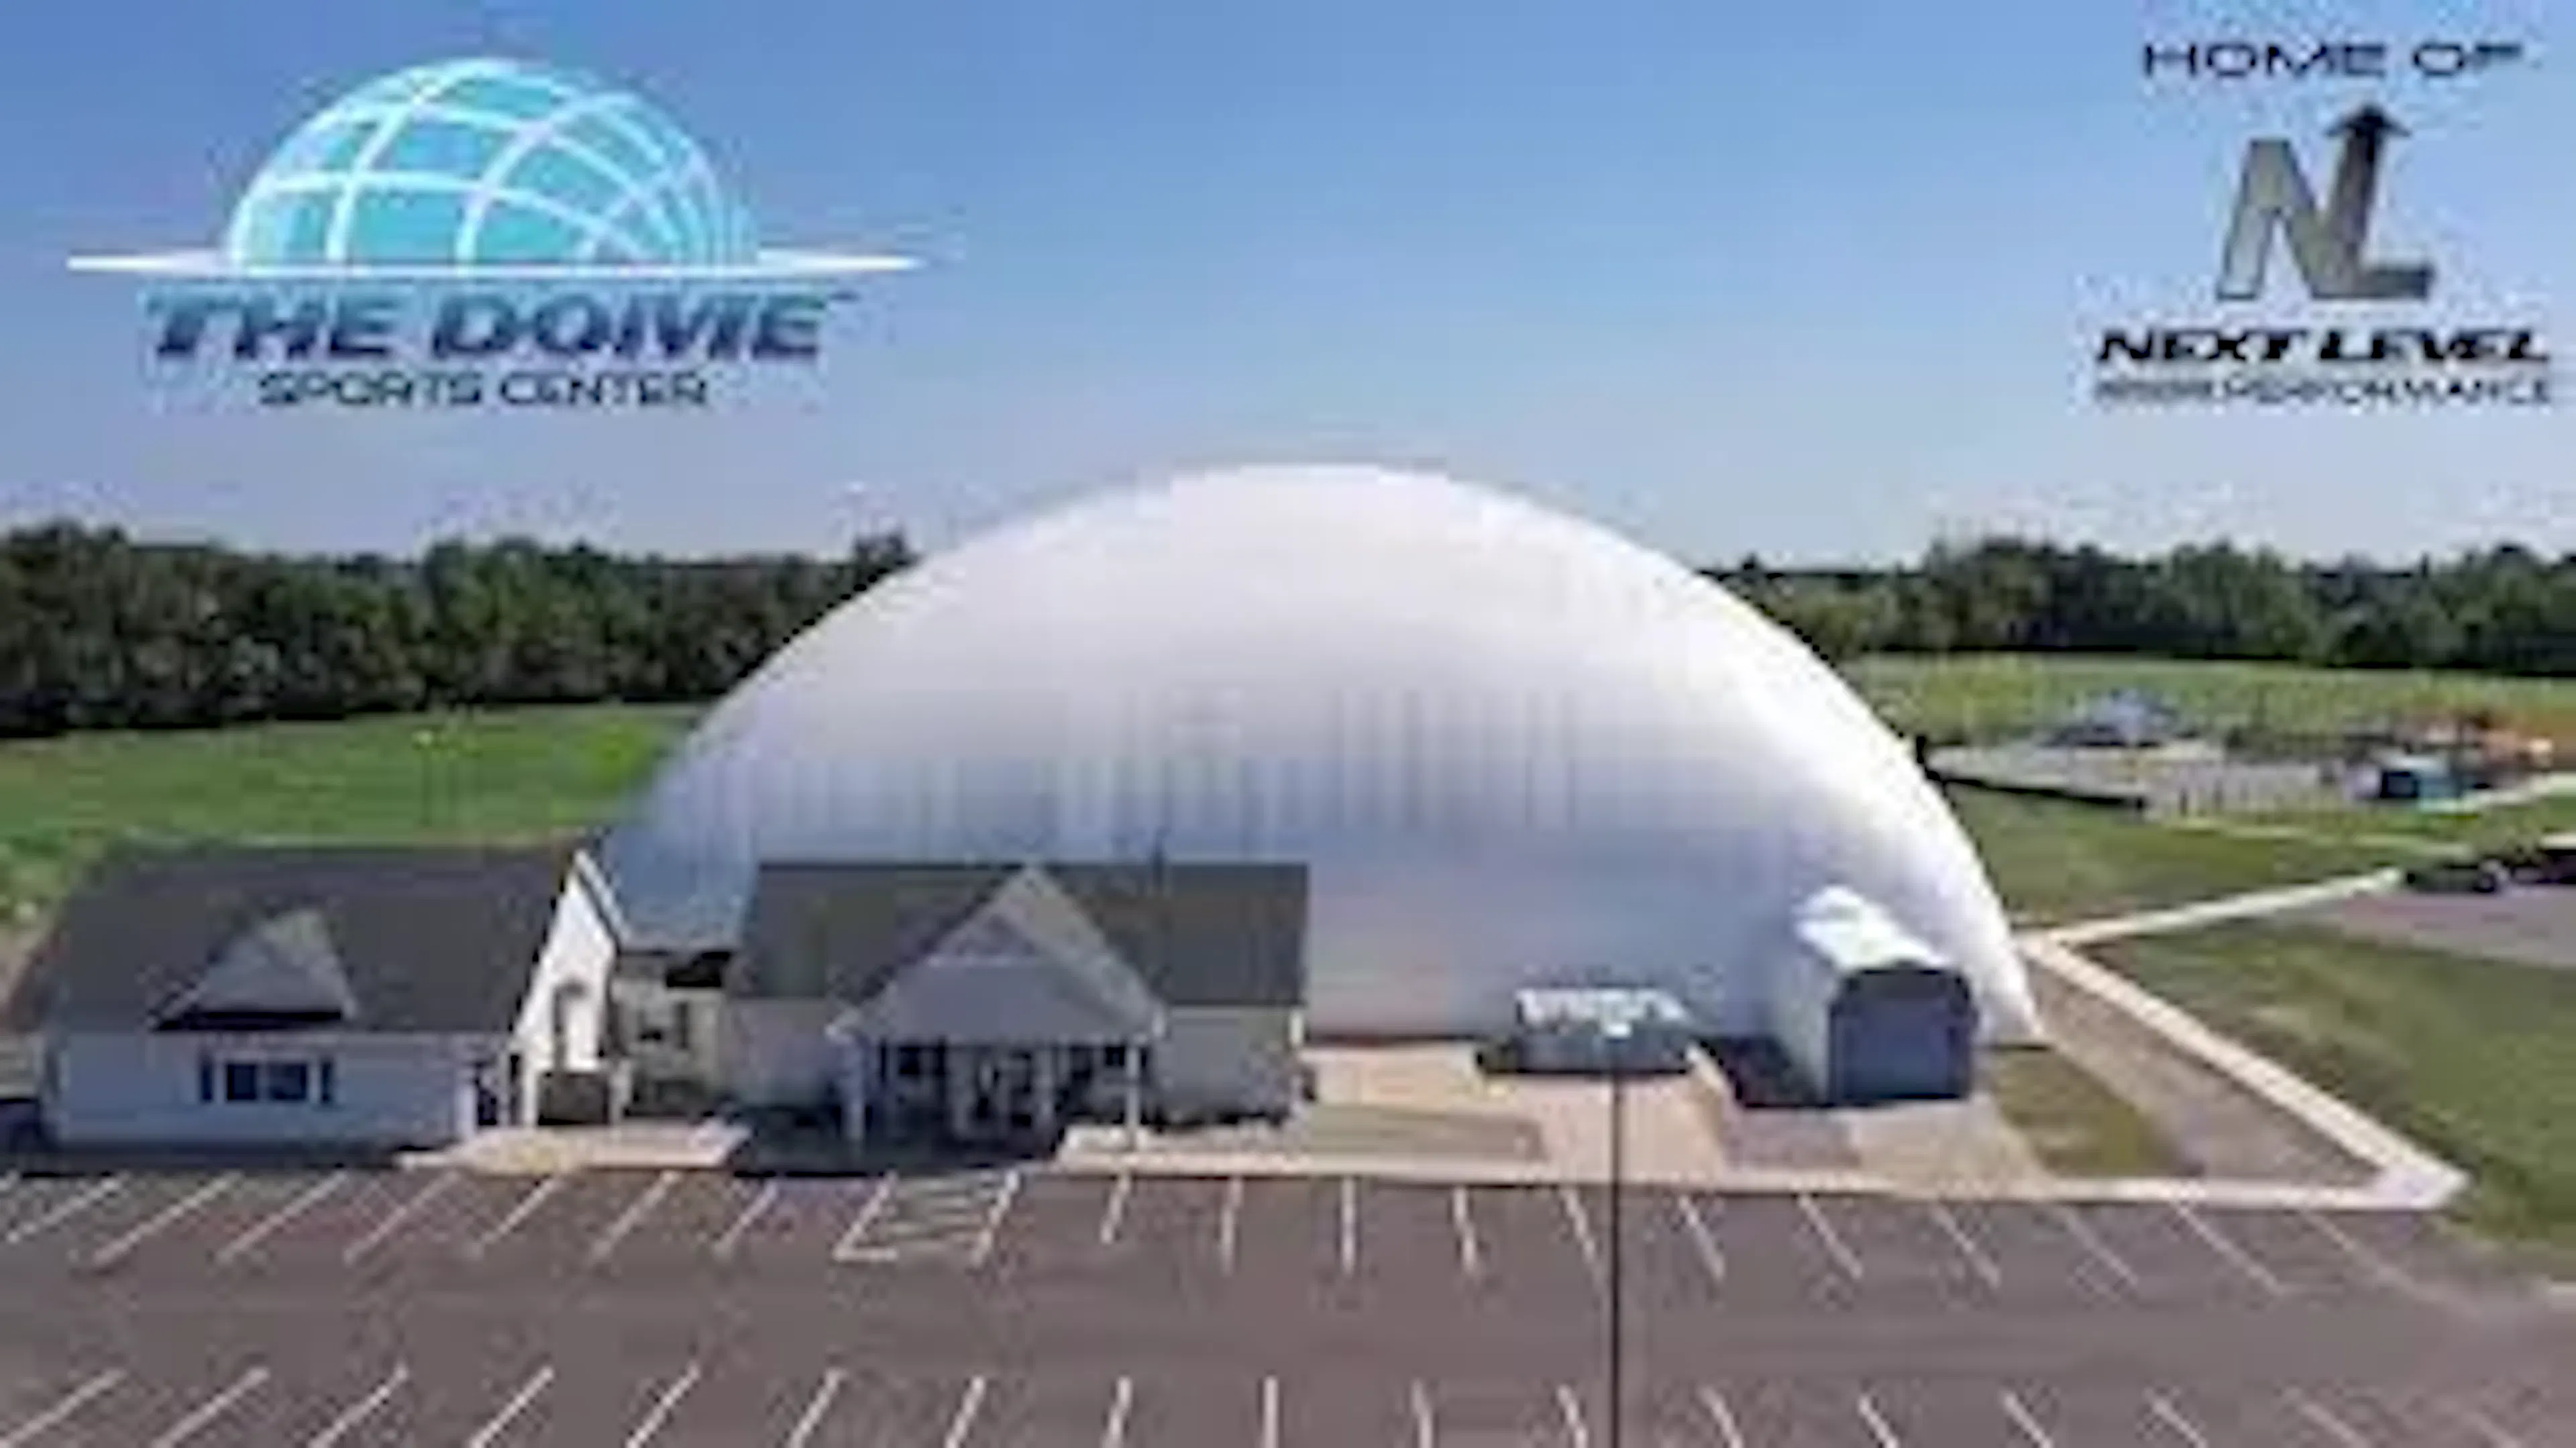 the dome sports center